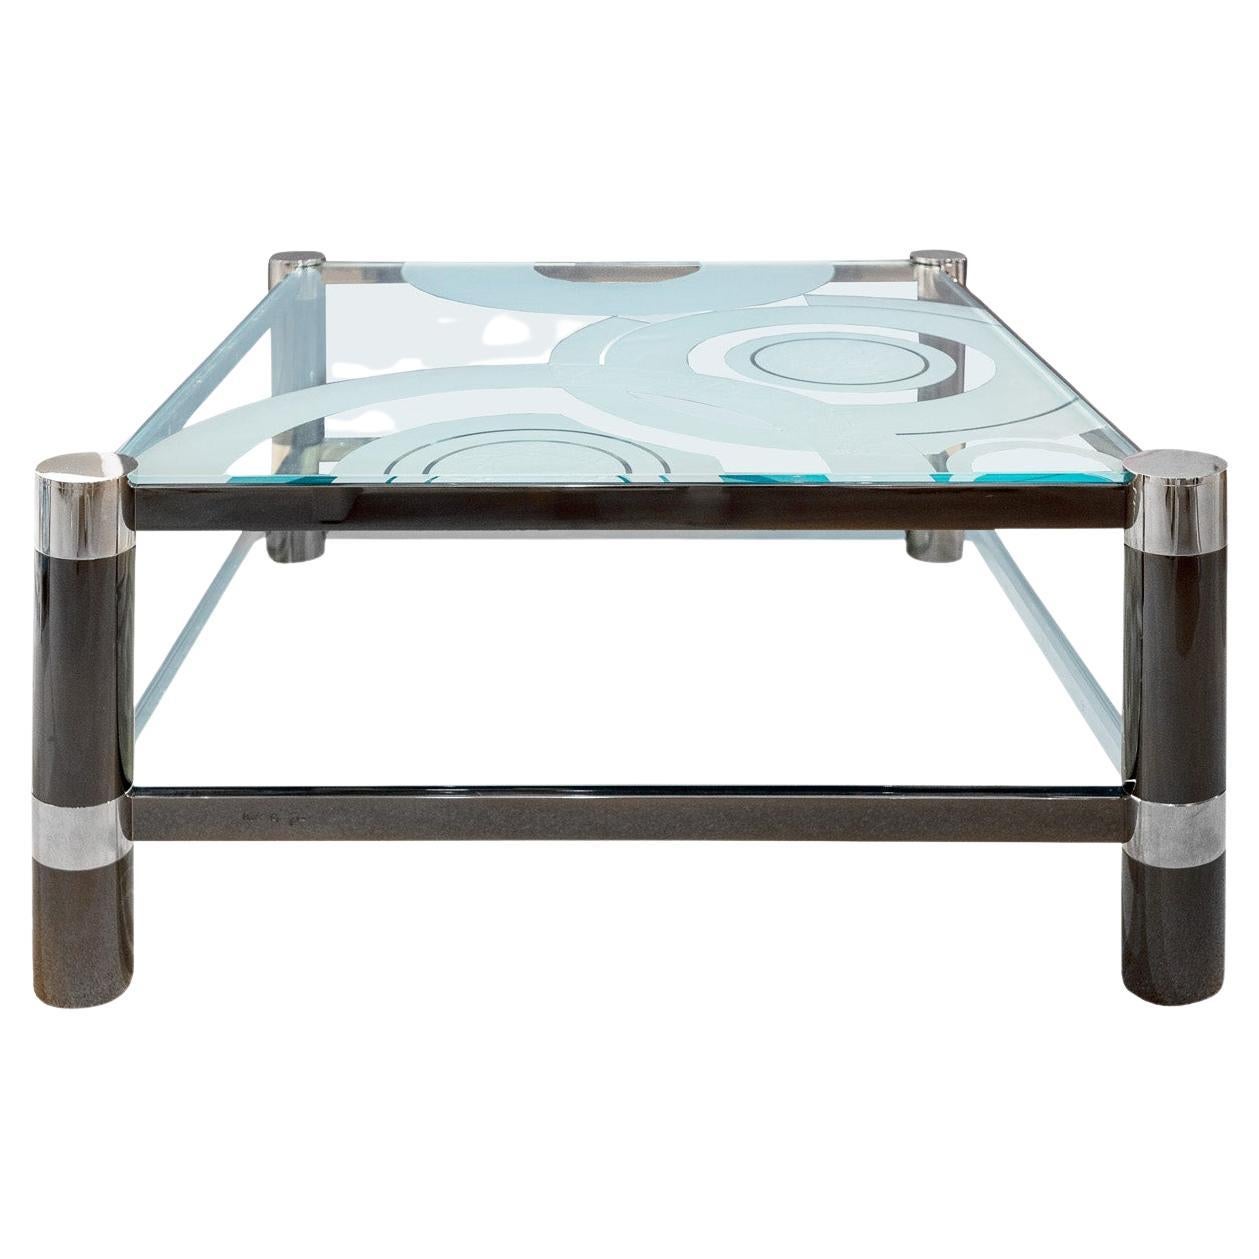 Karl Springer "Round Leg Coffee Table" with Artisan Glass Top, 1980s, 'Signed' For Sale